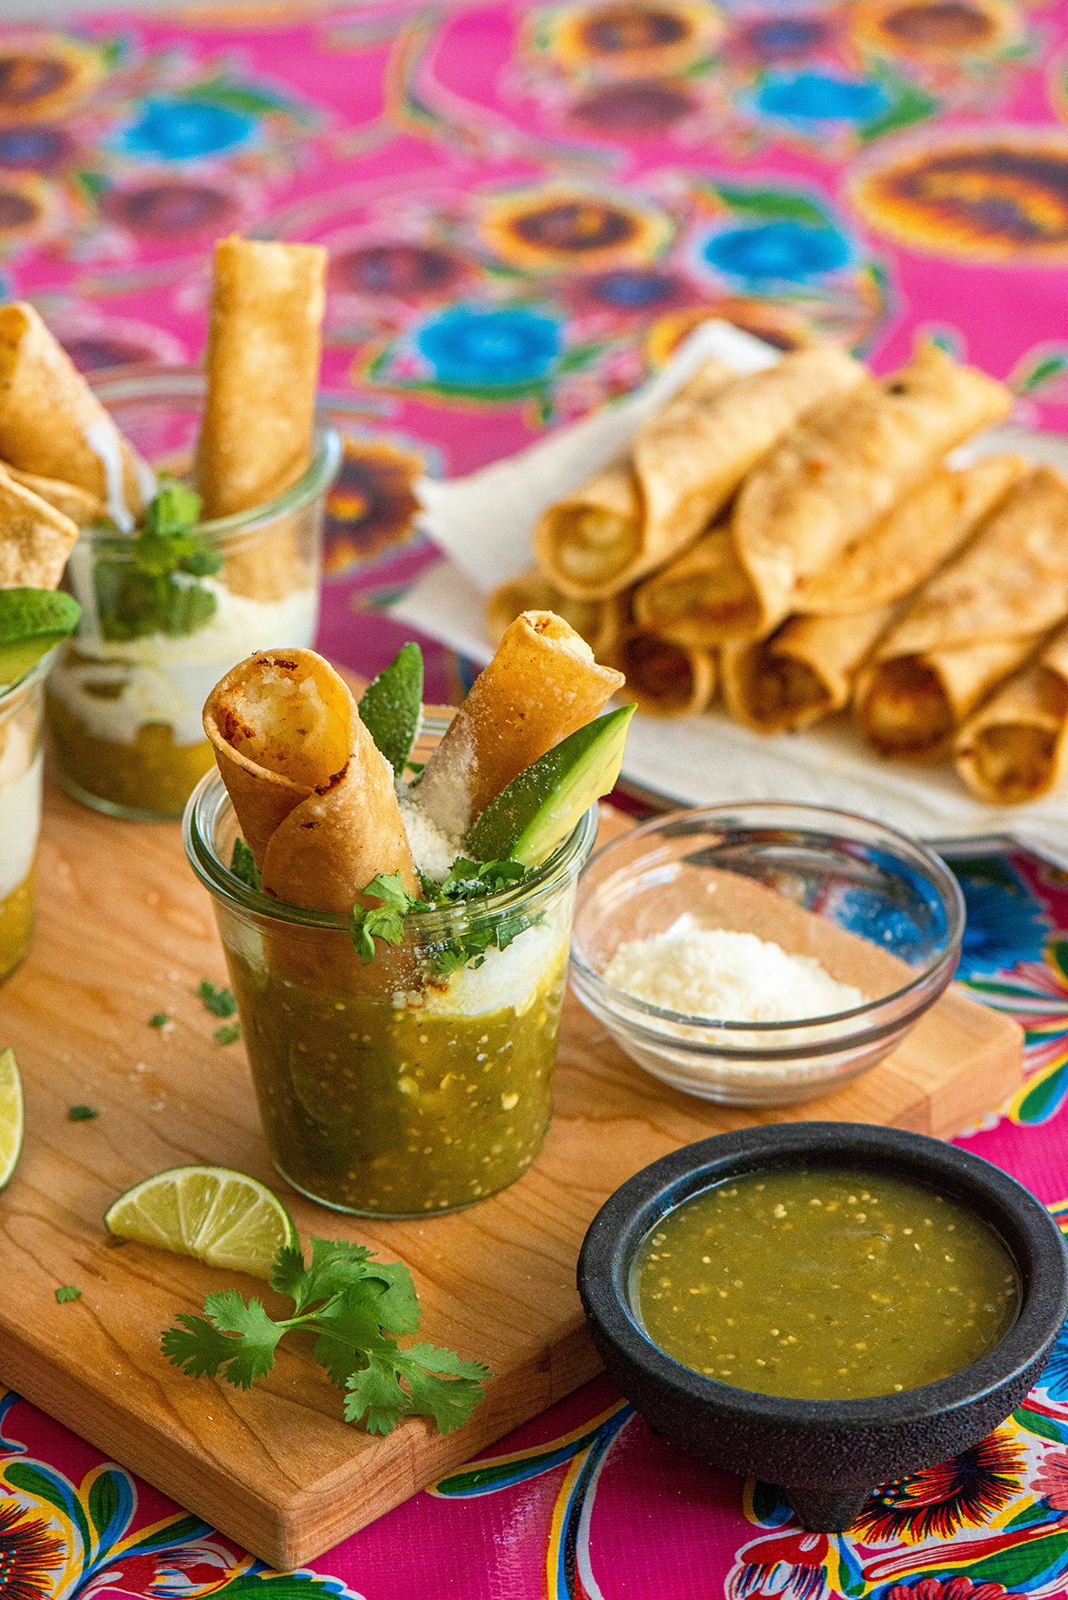 Taquitos Ahogados | Drowned Taquitos - Nibbles and Feasts